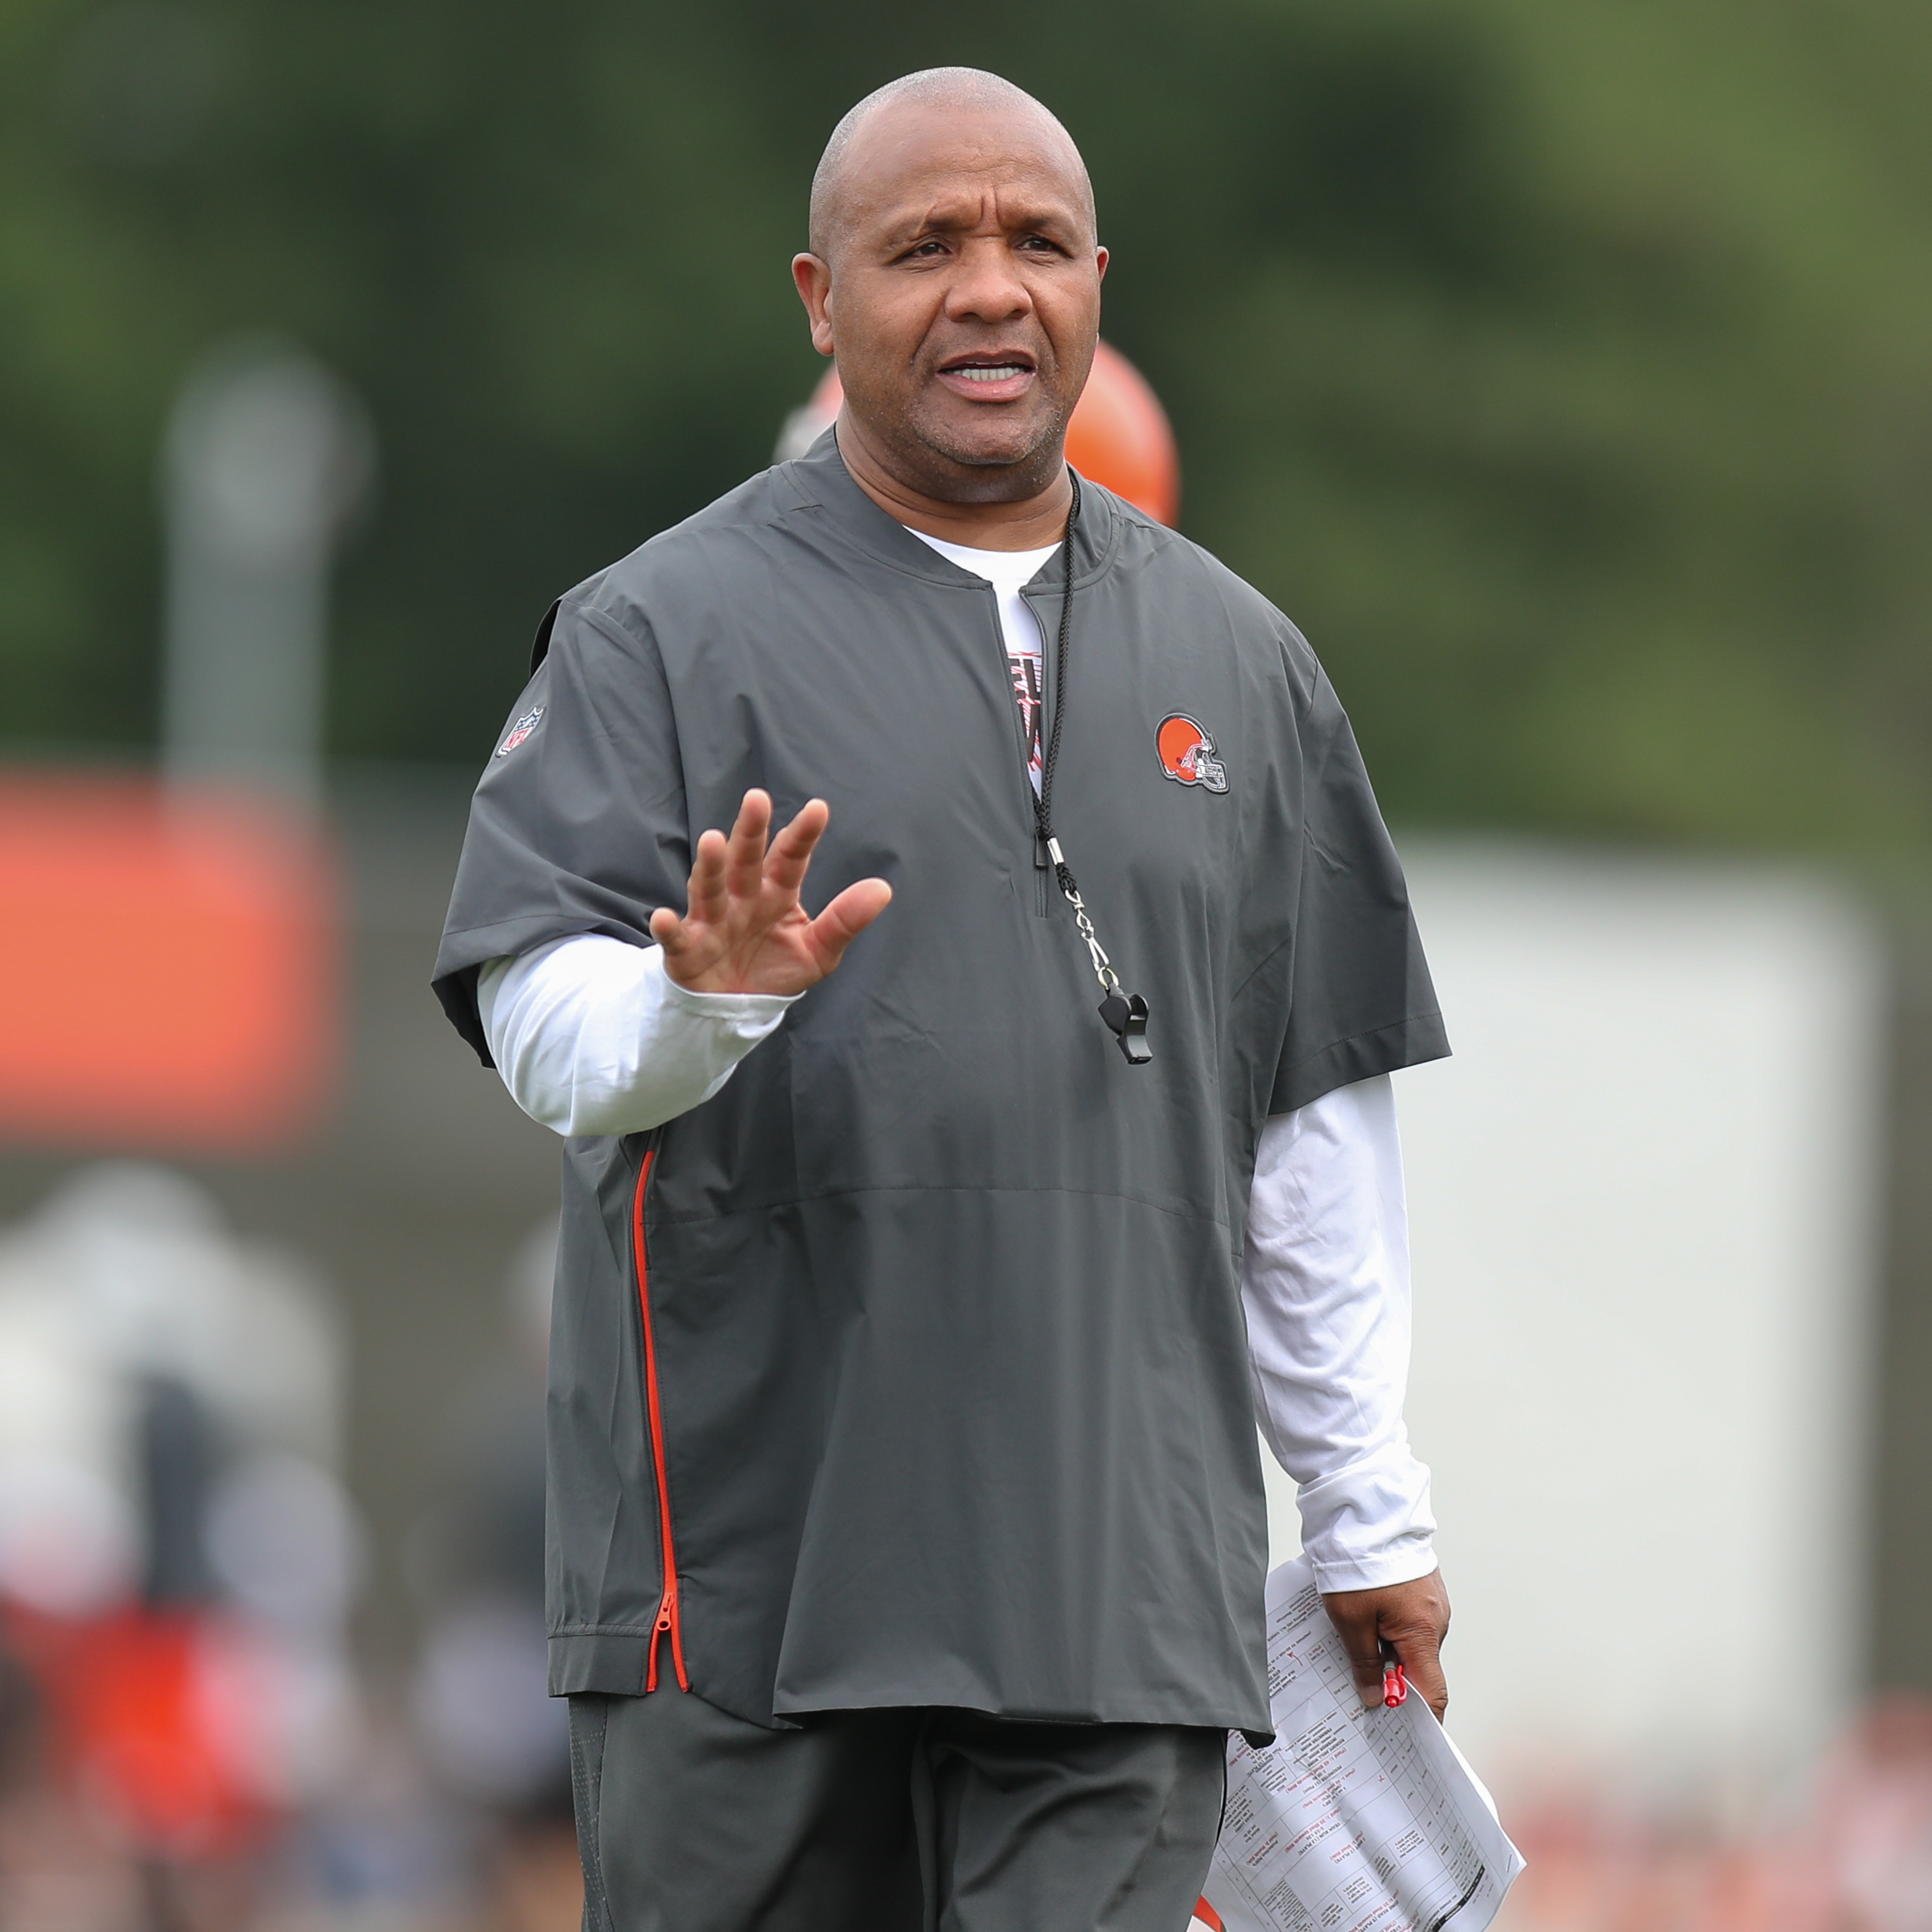 Report: Hue Jackson’s Browns Contract Included ‘Four Year Plan’ Bonuses Up to $750K